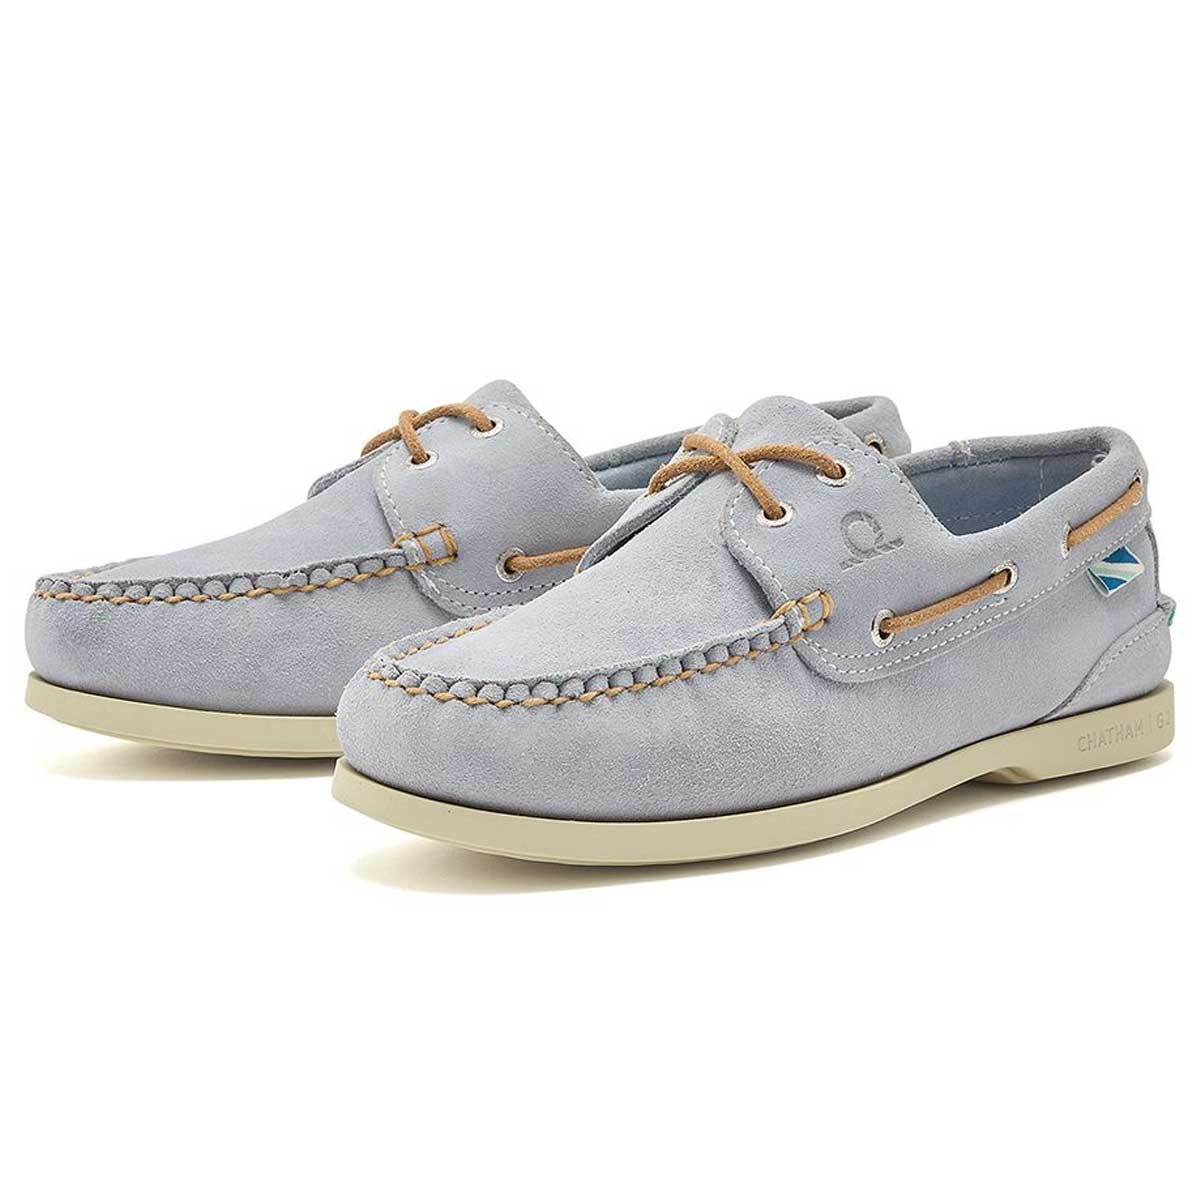 CHATHAM Pippa II G2 Leather Boat Shoes - Women's - Lavender Suede